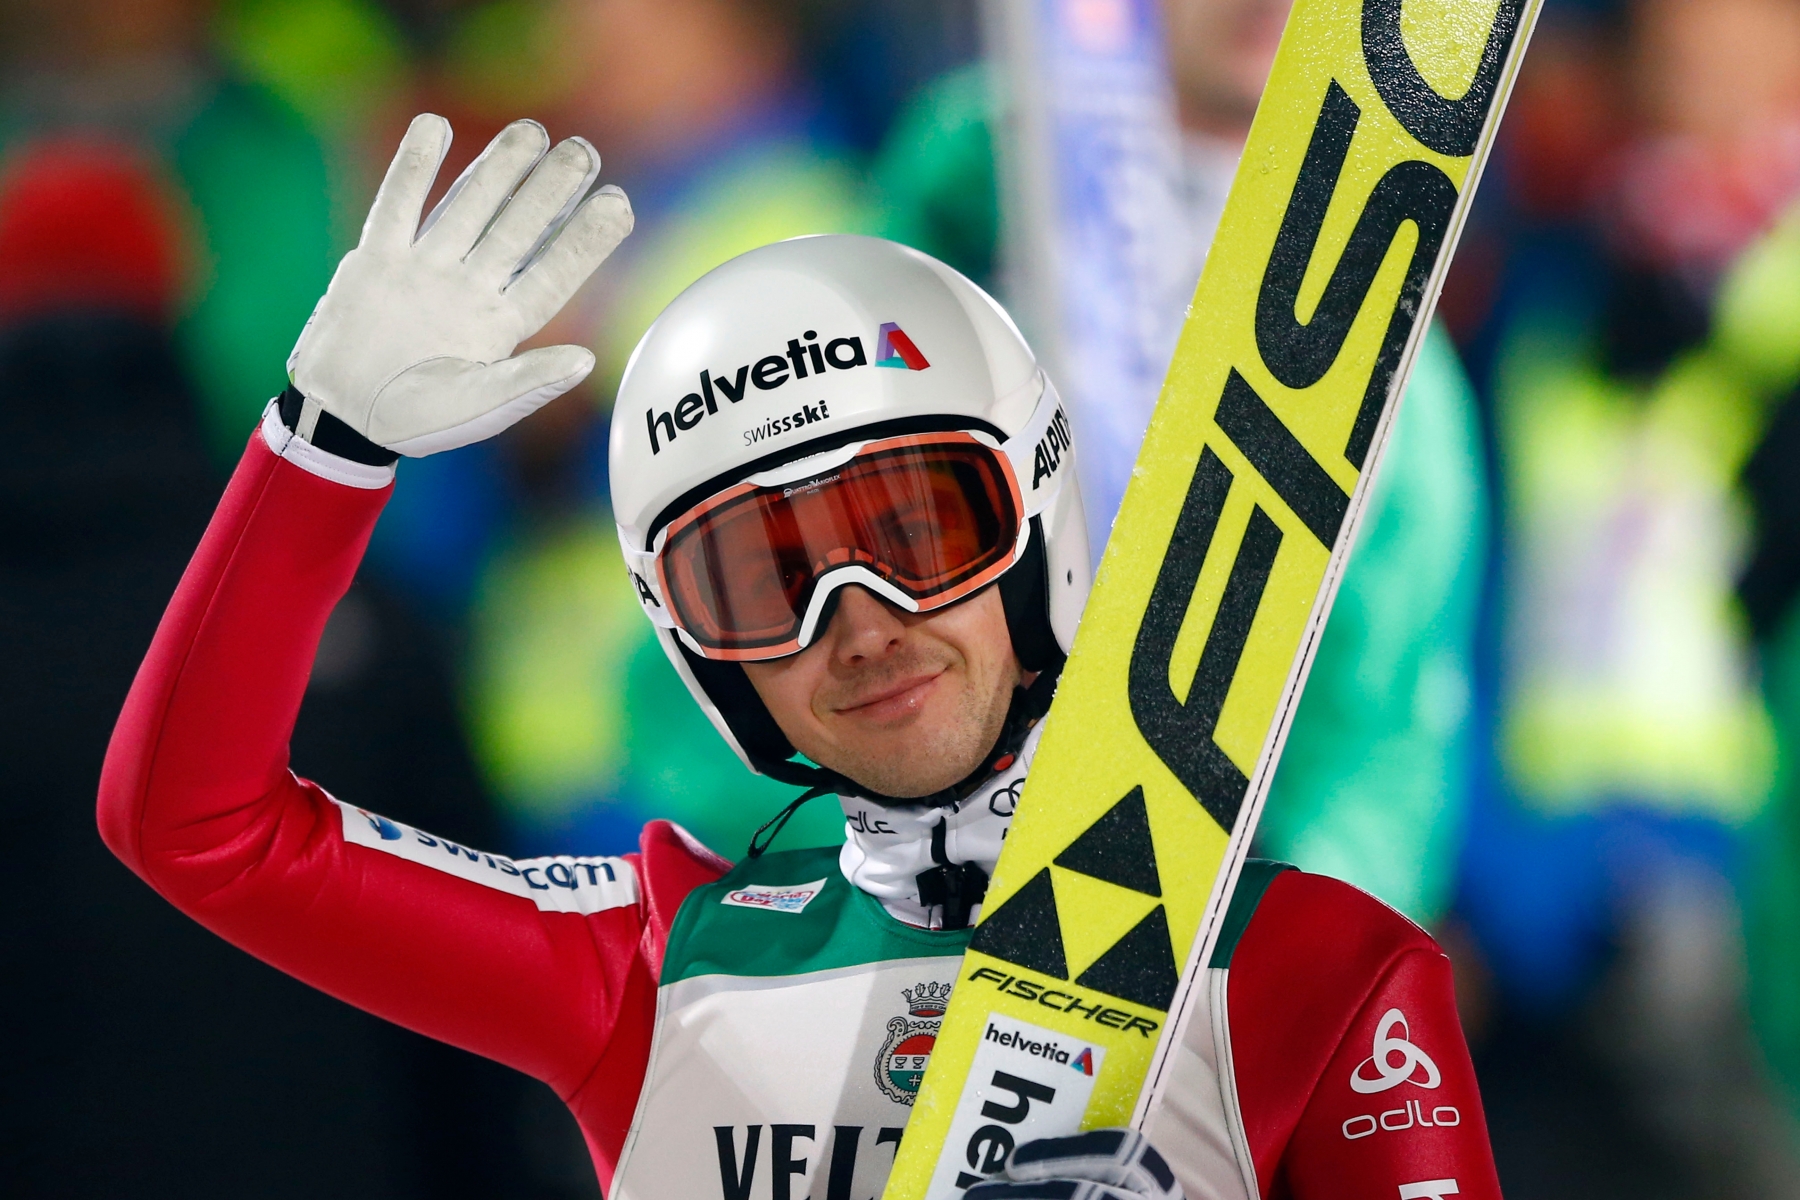 Switzerland's Simon Ammann waves to supporters after his first competition jump at the first stage of the 64. four hills ski jumping tournament in Oberstdorf, Germany,  Tuesday, Dec. 29, 2015. (AP Photo/Matthias Schrader) Germany Ski Jumping Four Hills